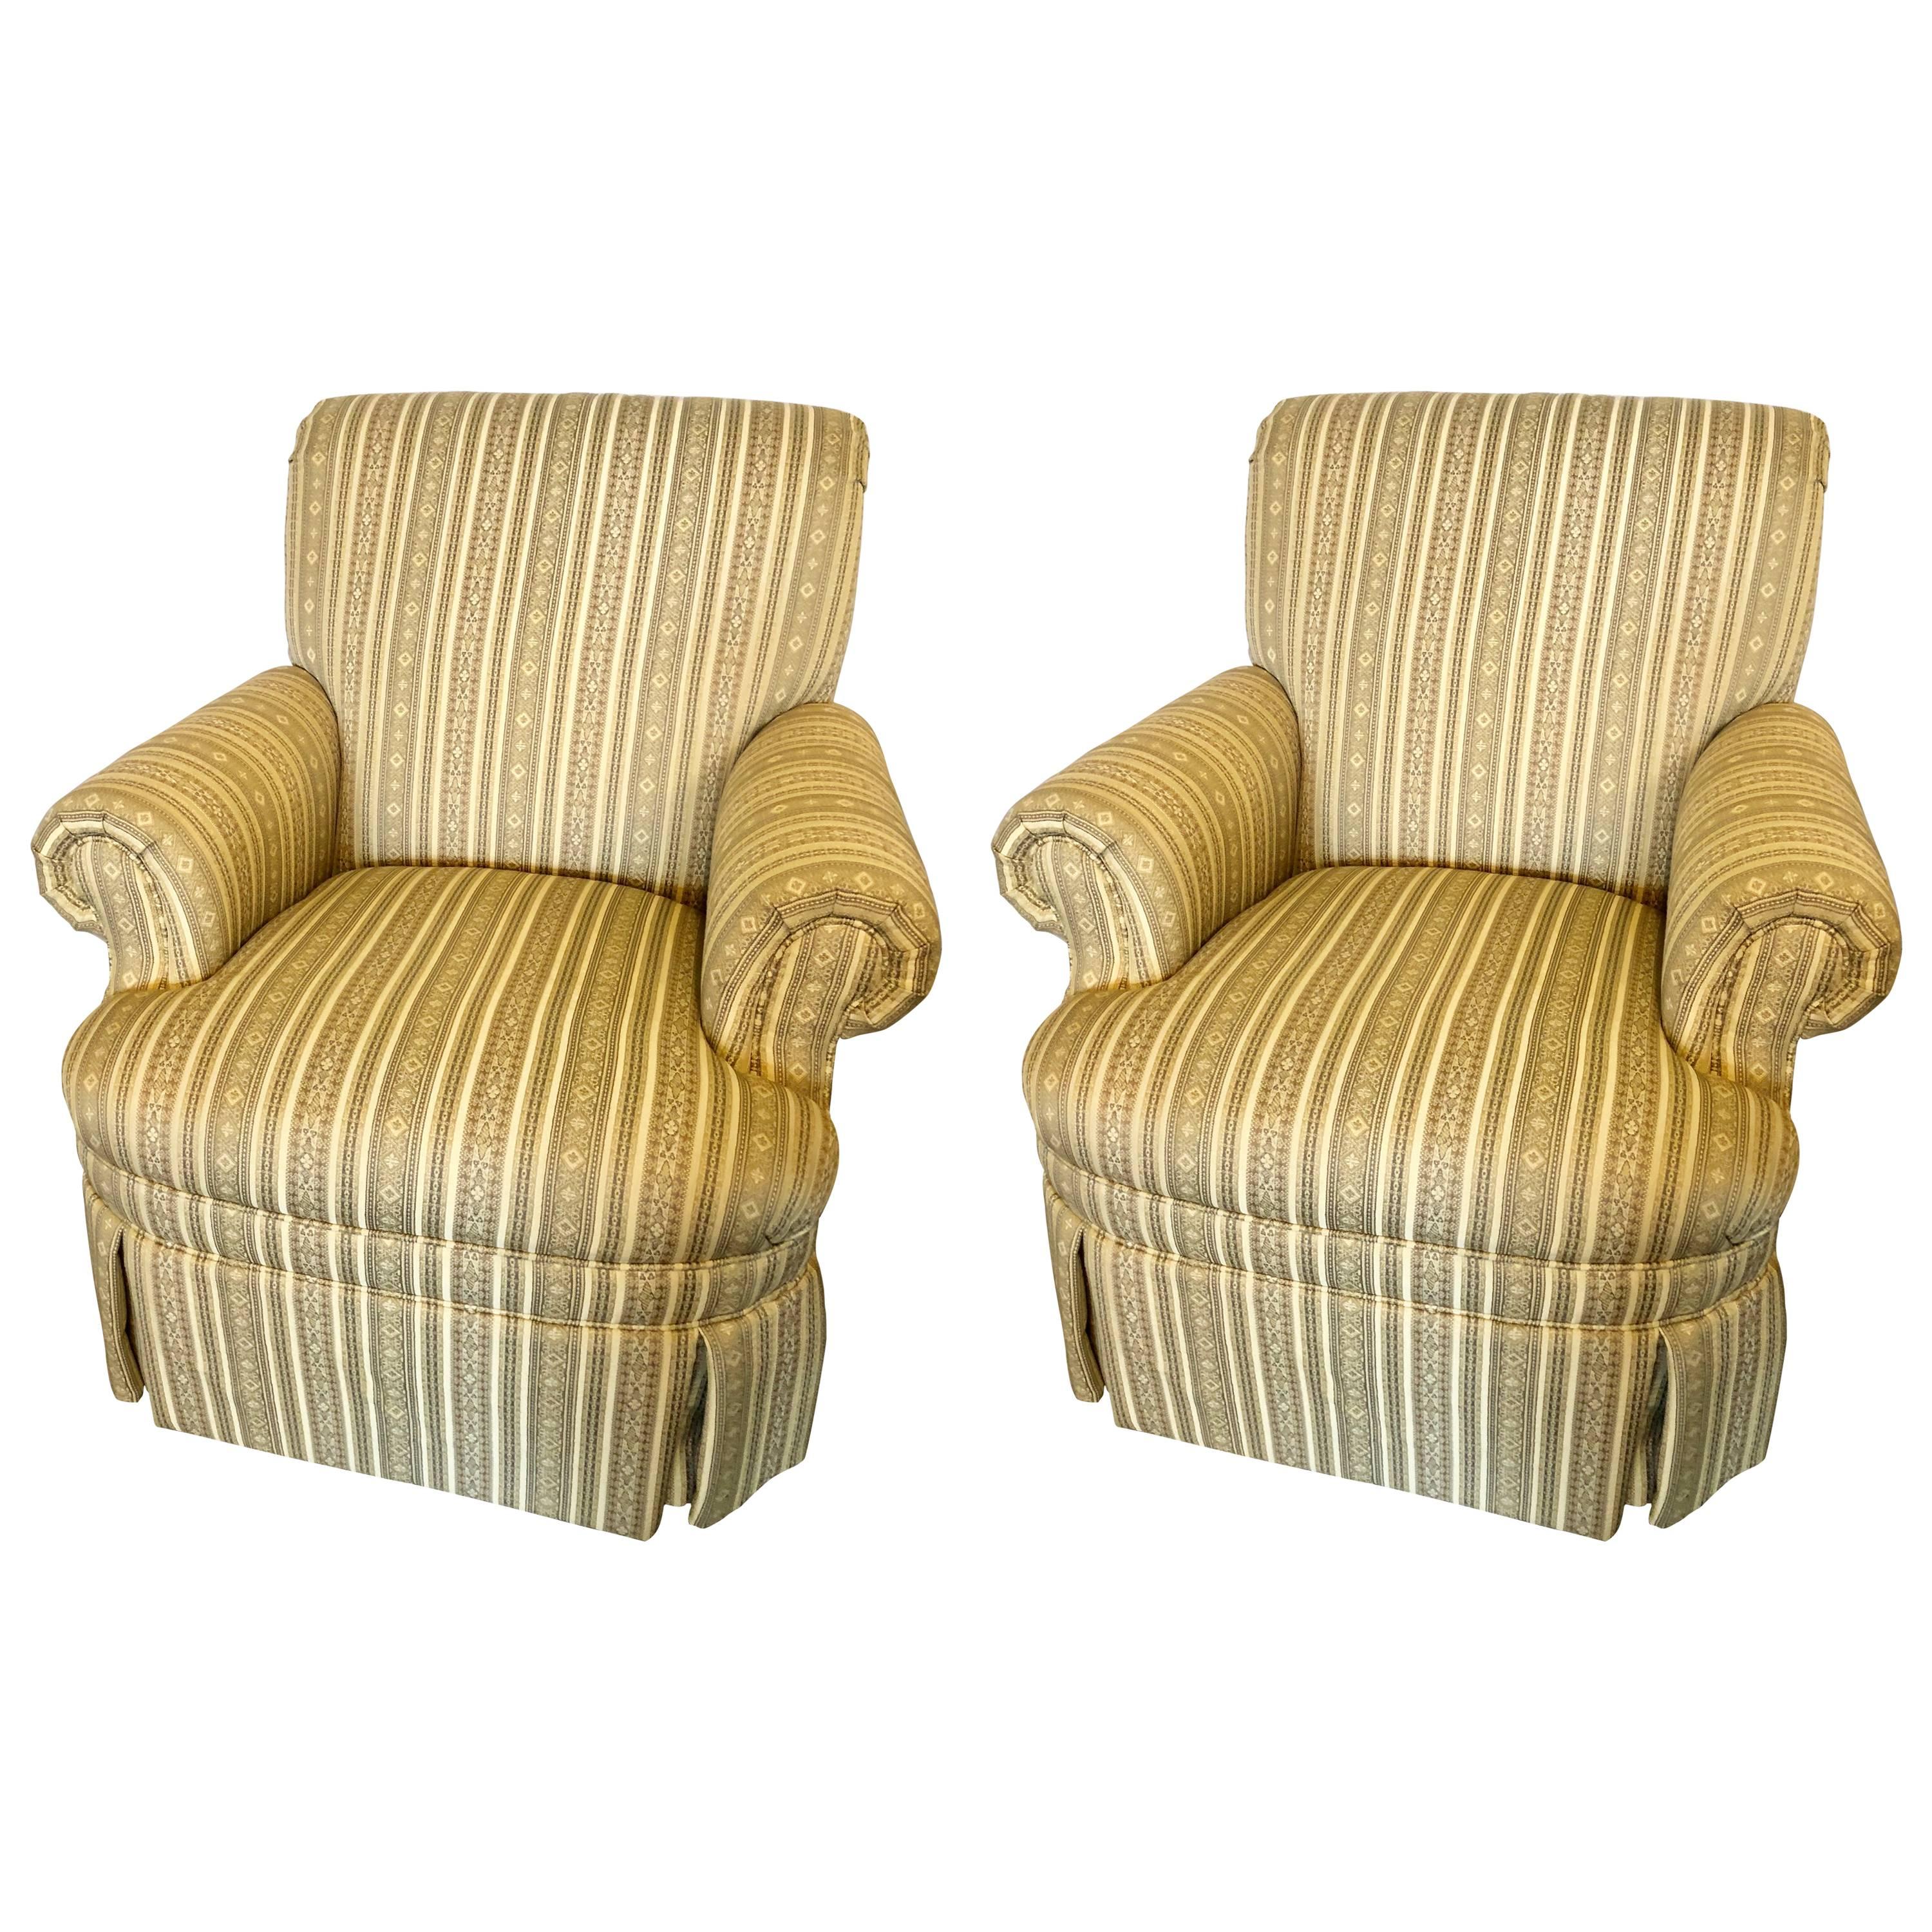 Pair of Hollywood Regency Style Custom Overstuffed Arm/Lounge Chairs Fine Fabric